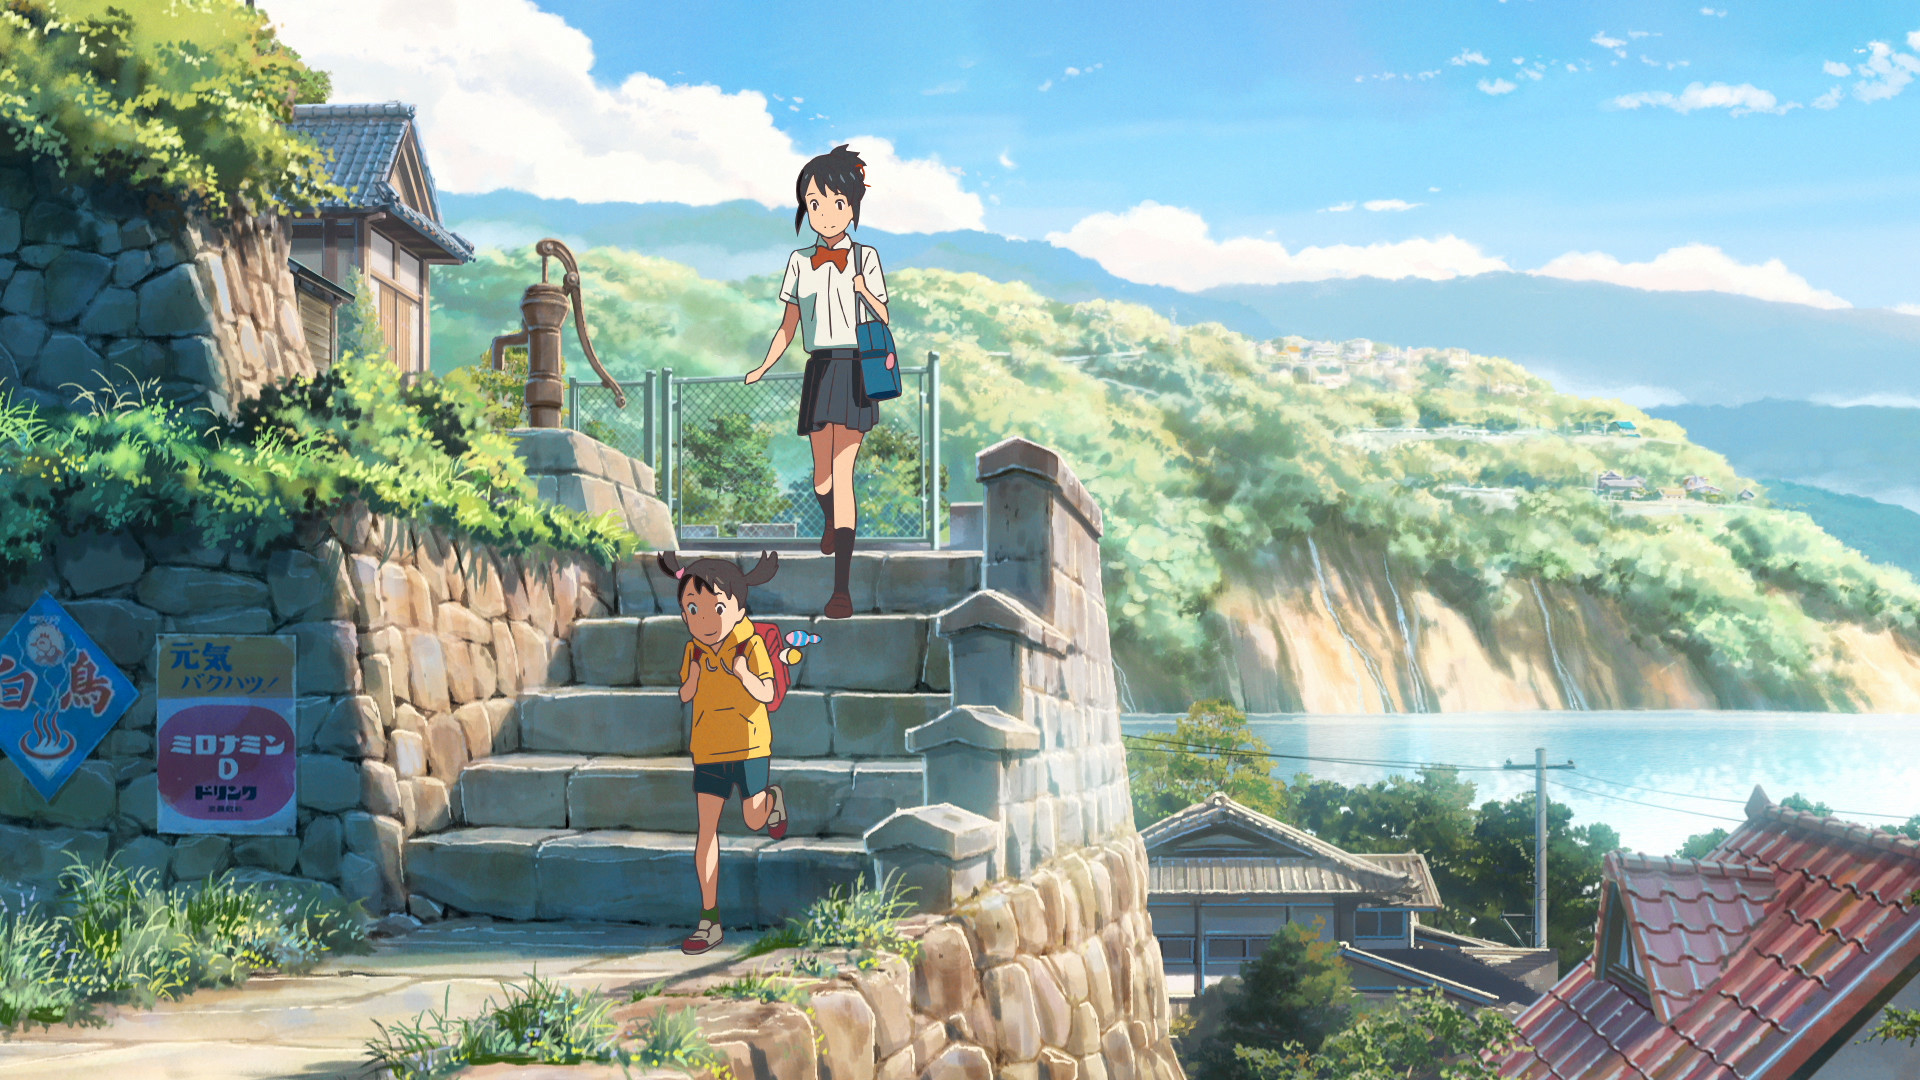 1920x1080 ... Your Name because of the more dynamic shots. Movement and transitions  were wonderfully done to differentiate the more mundane routines from the  story ...